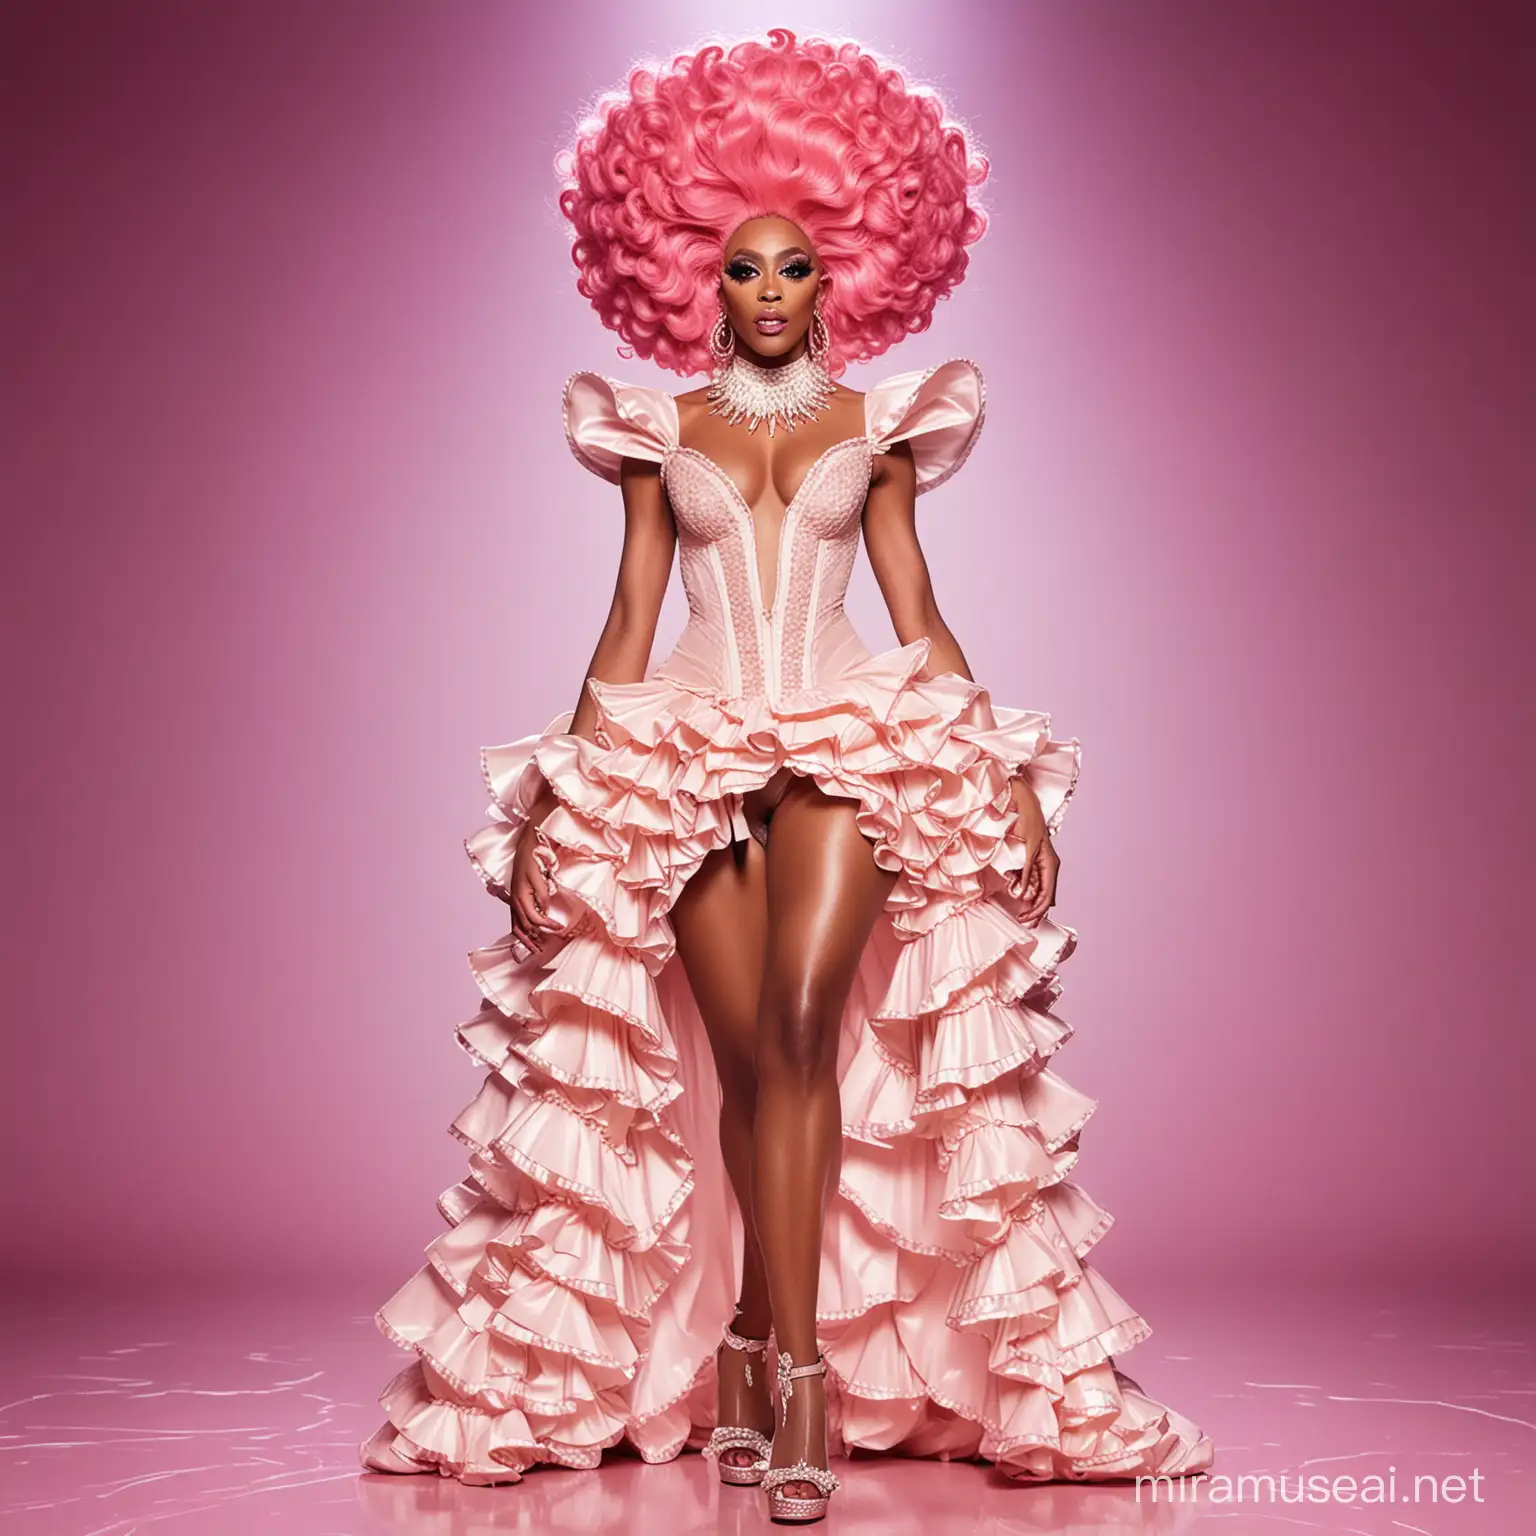 a full body image of a skinny african american drag queen walking on the Rupaul's Drag race runway wearing an outfit inspired by the prompt: ruffles 